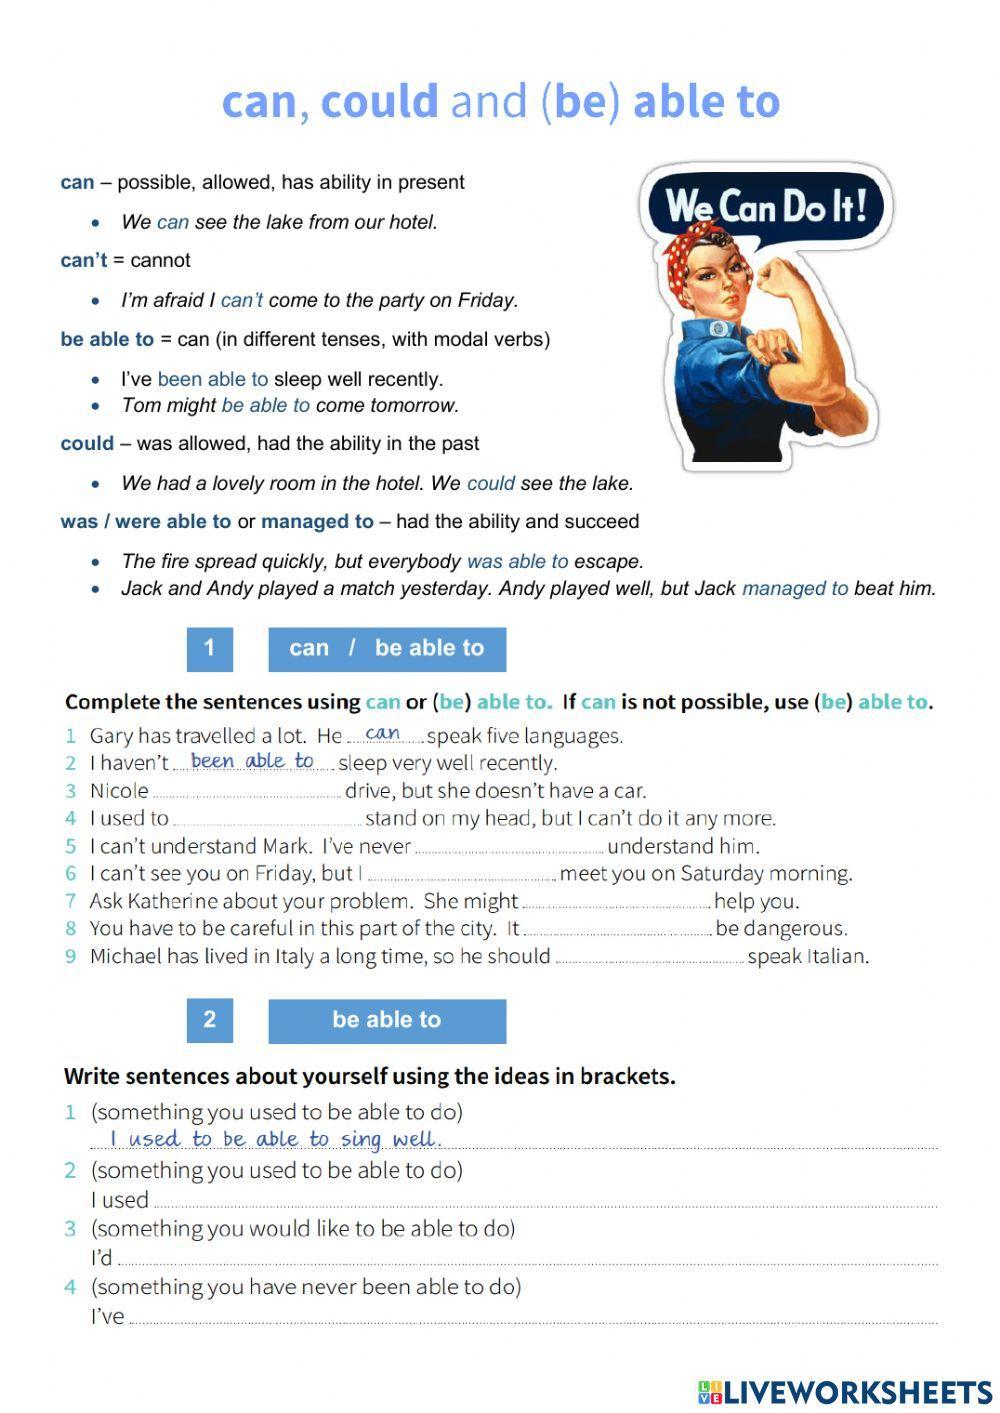 Can, could, be able to interactive worksheet | Live Worksheets